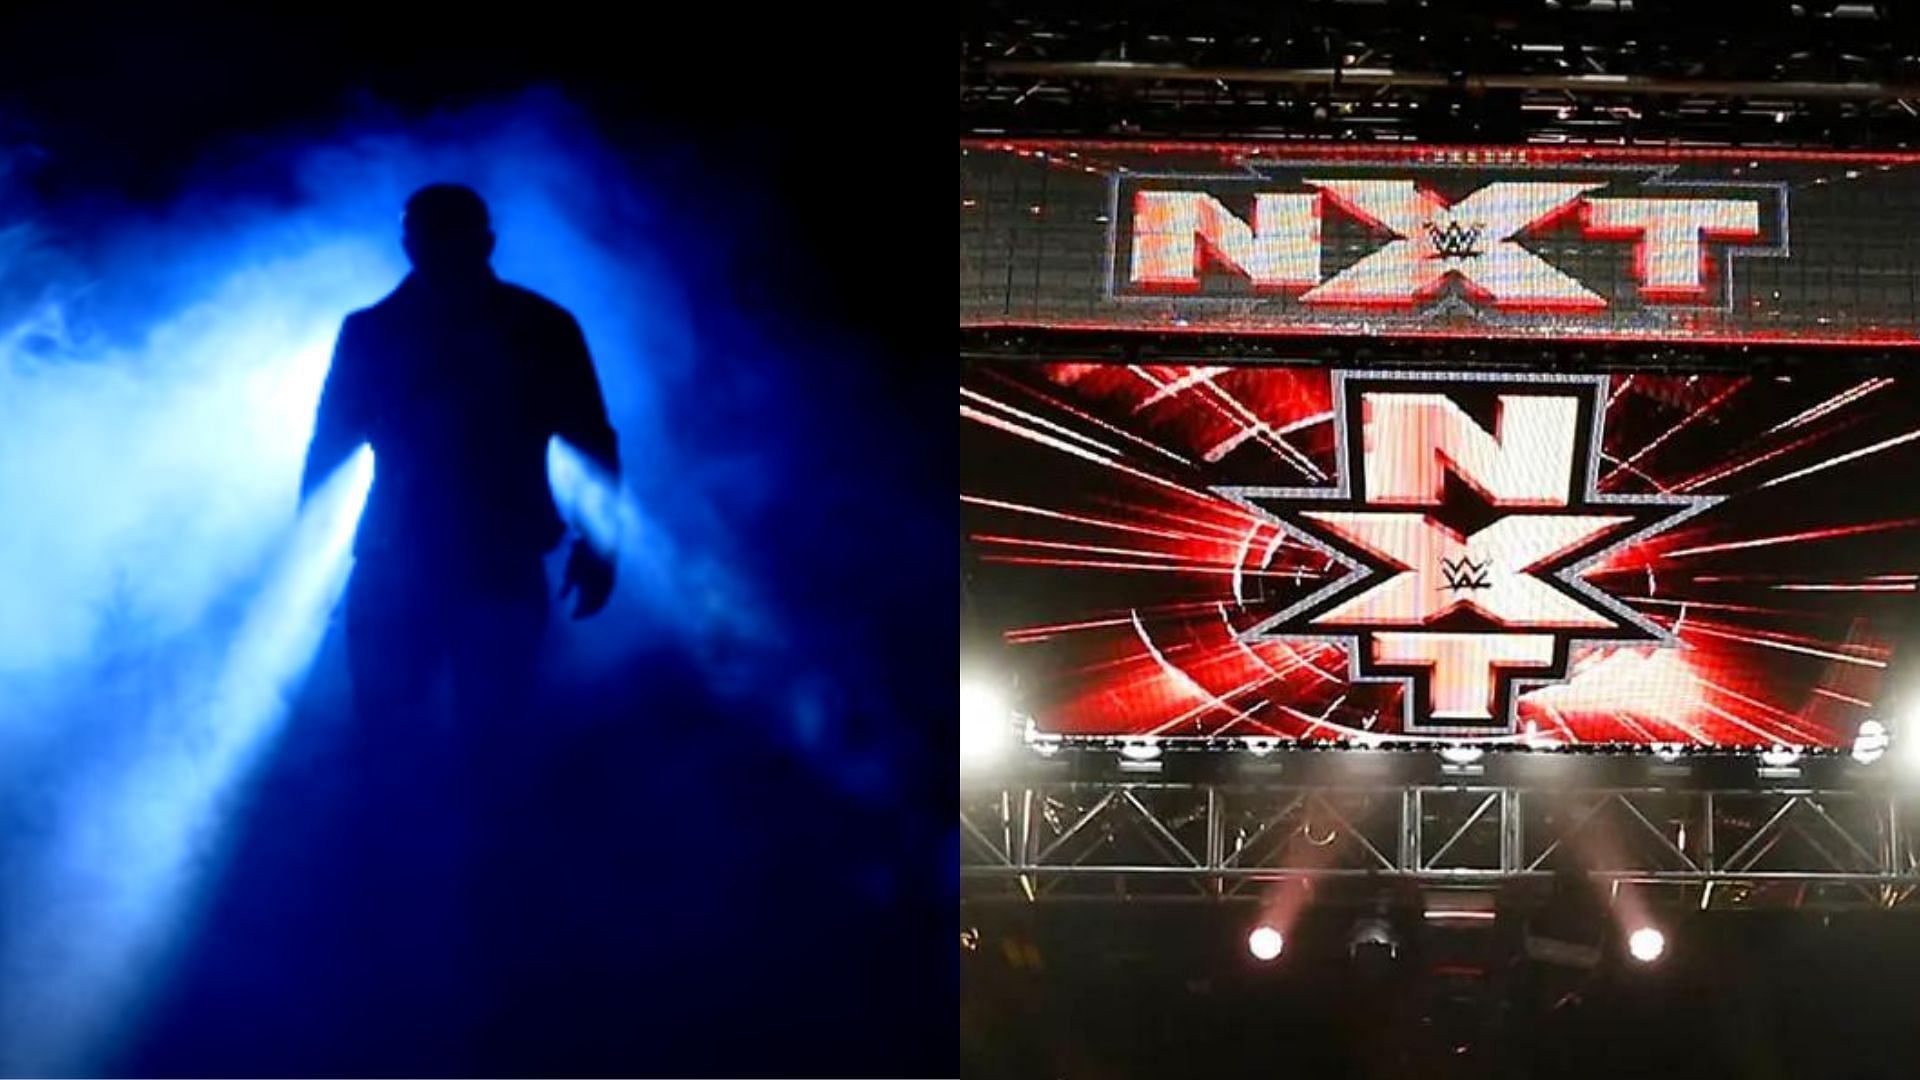 NXT Great American Bash airs tonight in Texas!